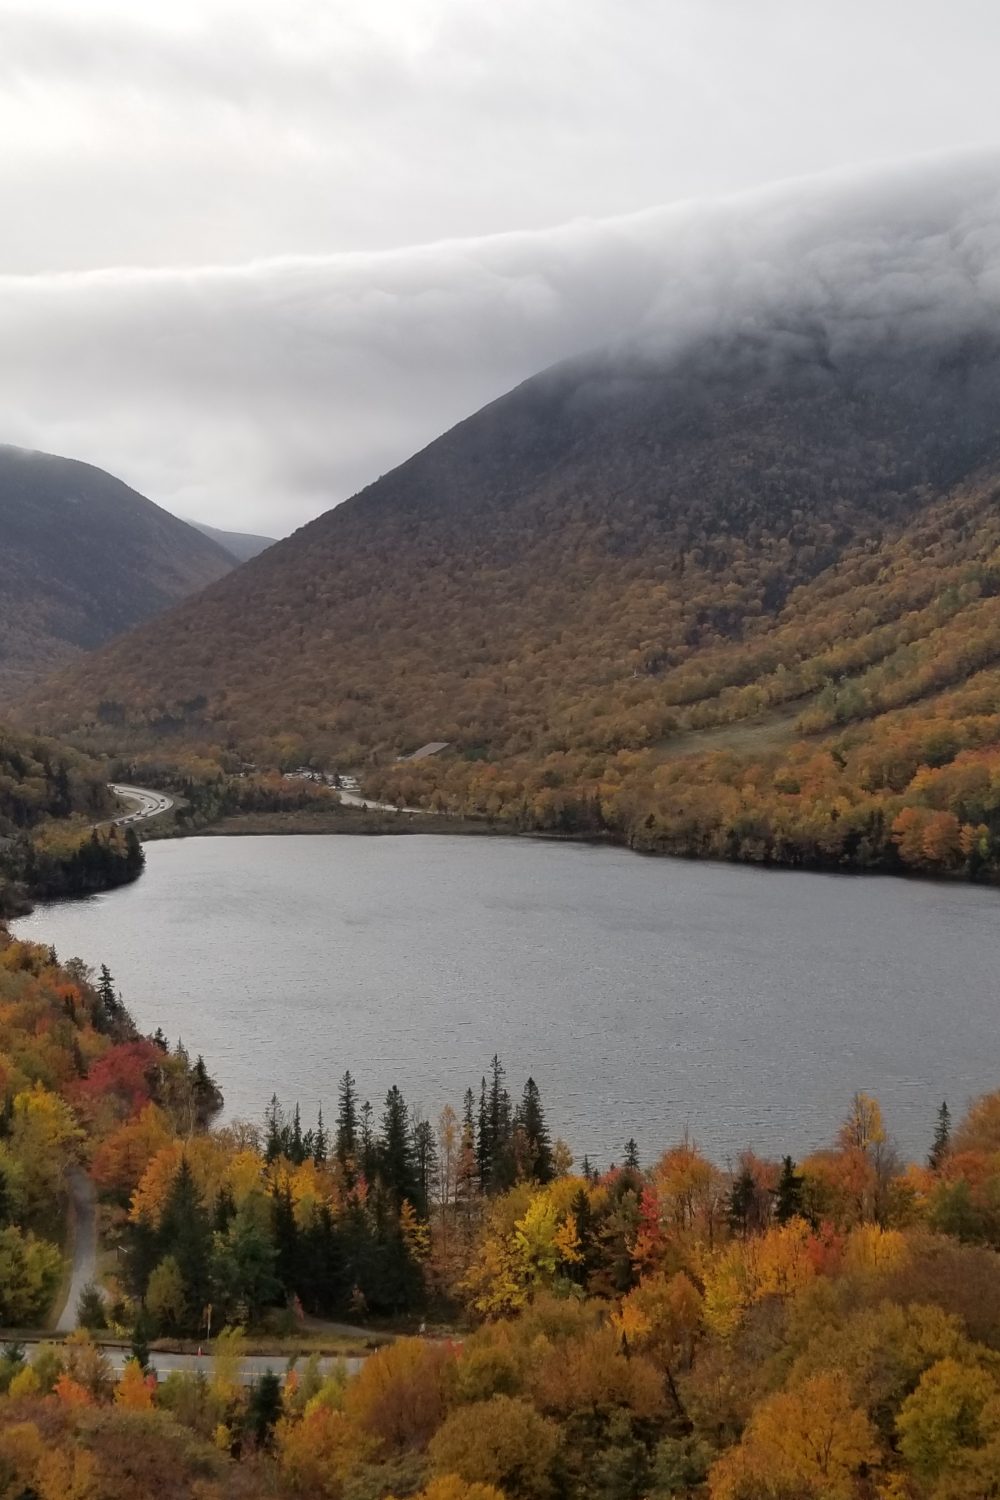 The beautiful view from Artist's Bluff in Fanconia Notch State Park in New Hampshire.  The lake surrounded by the fall changing leaves is stunning.